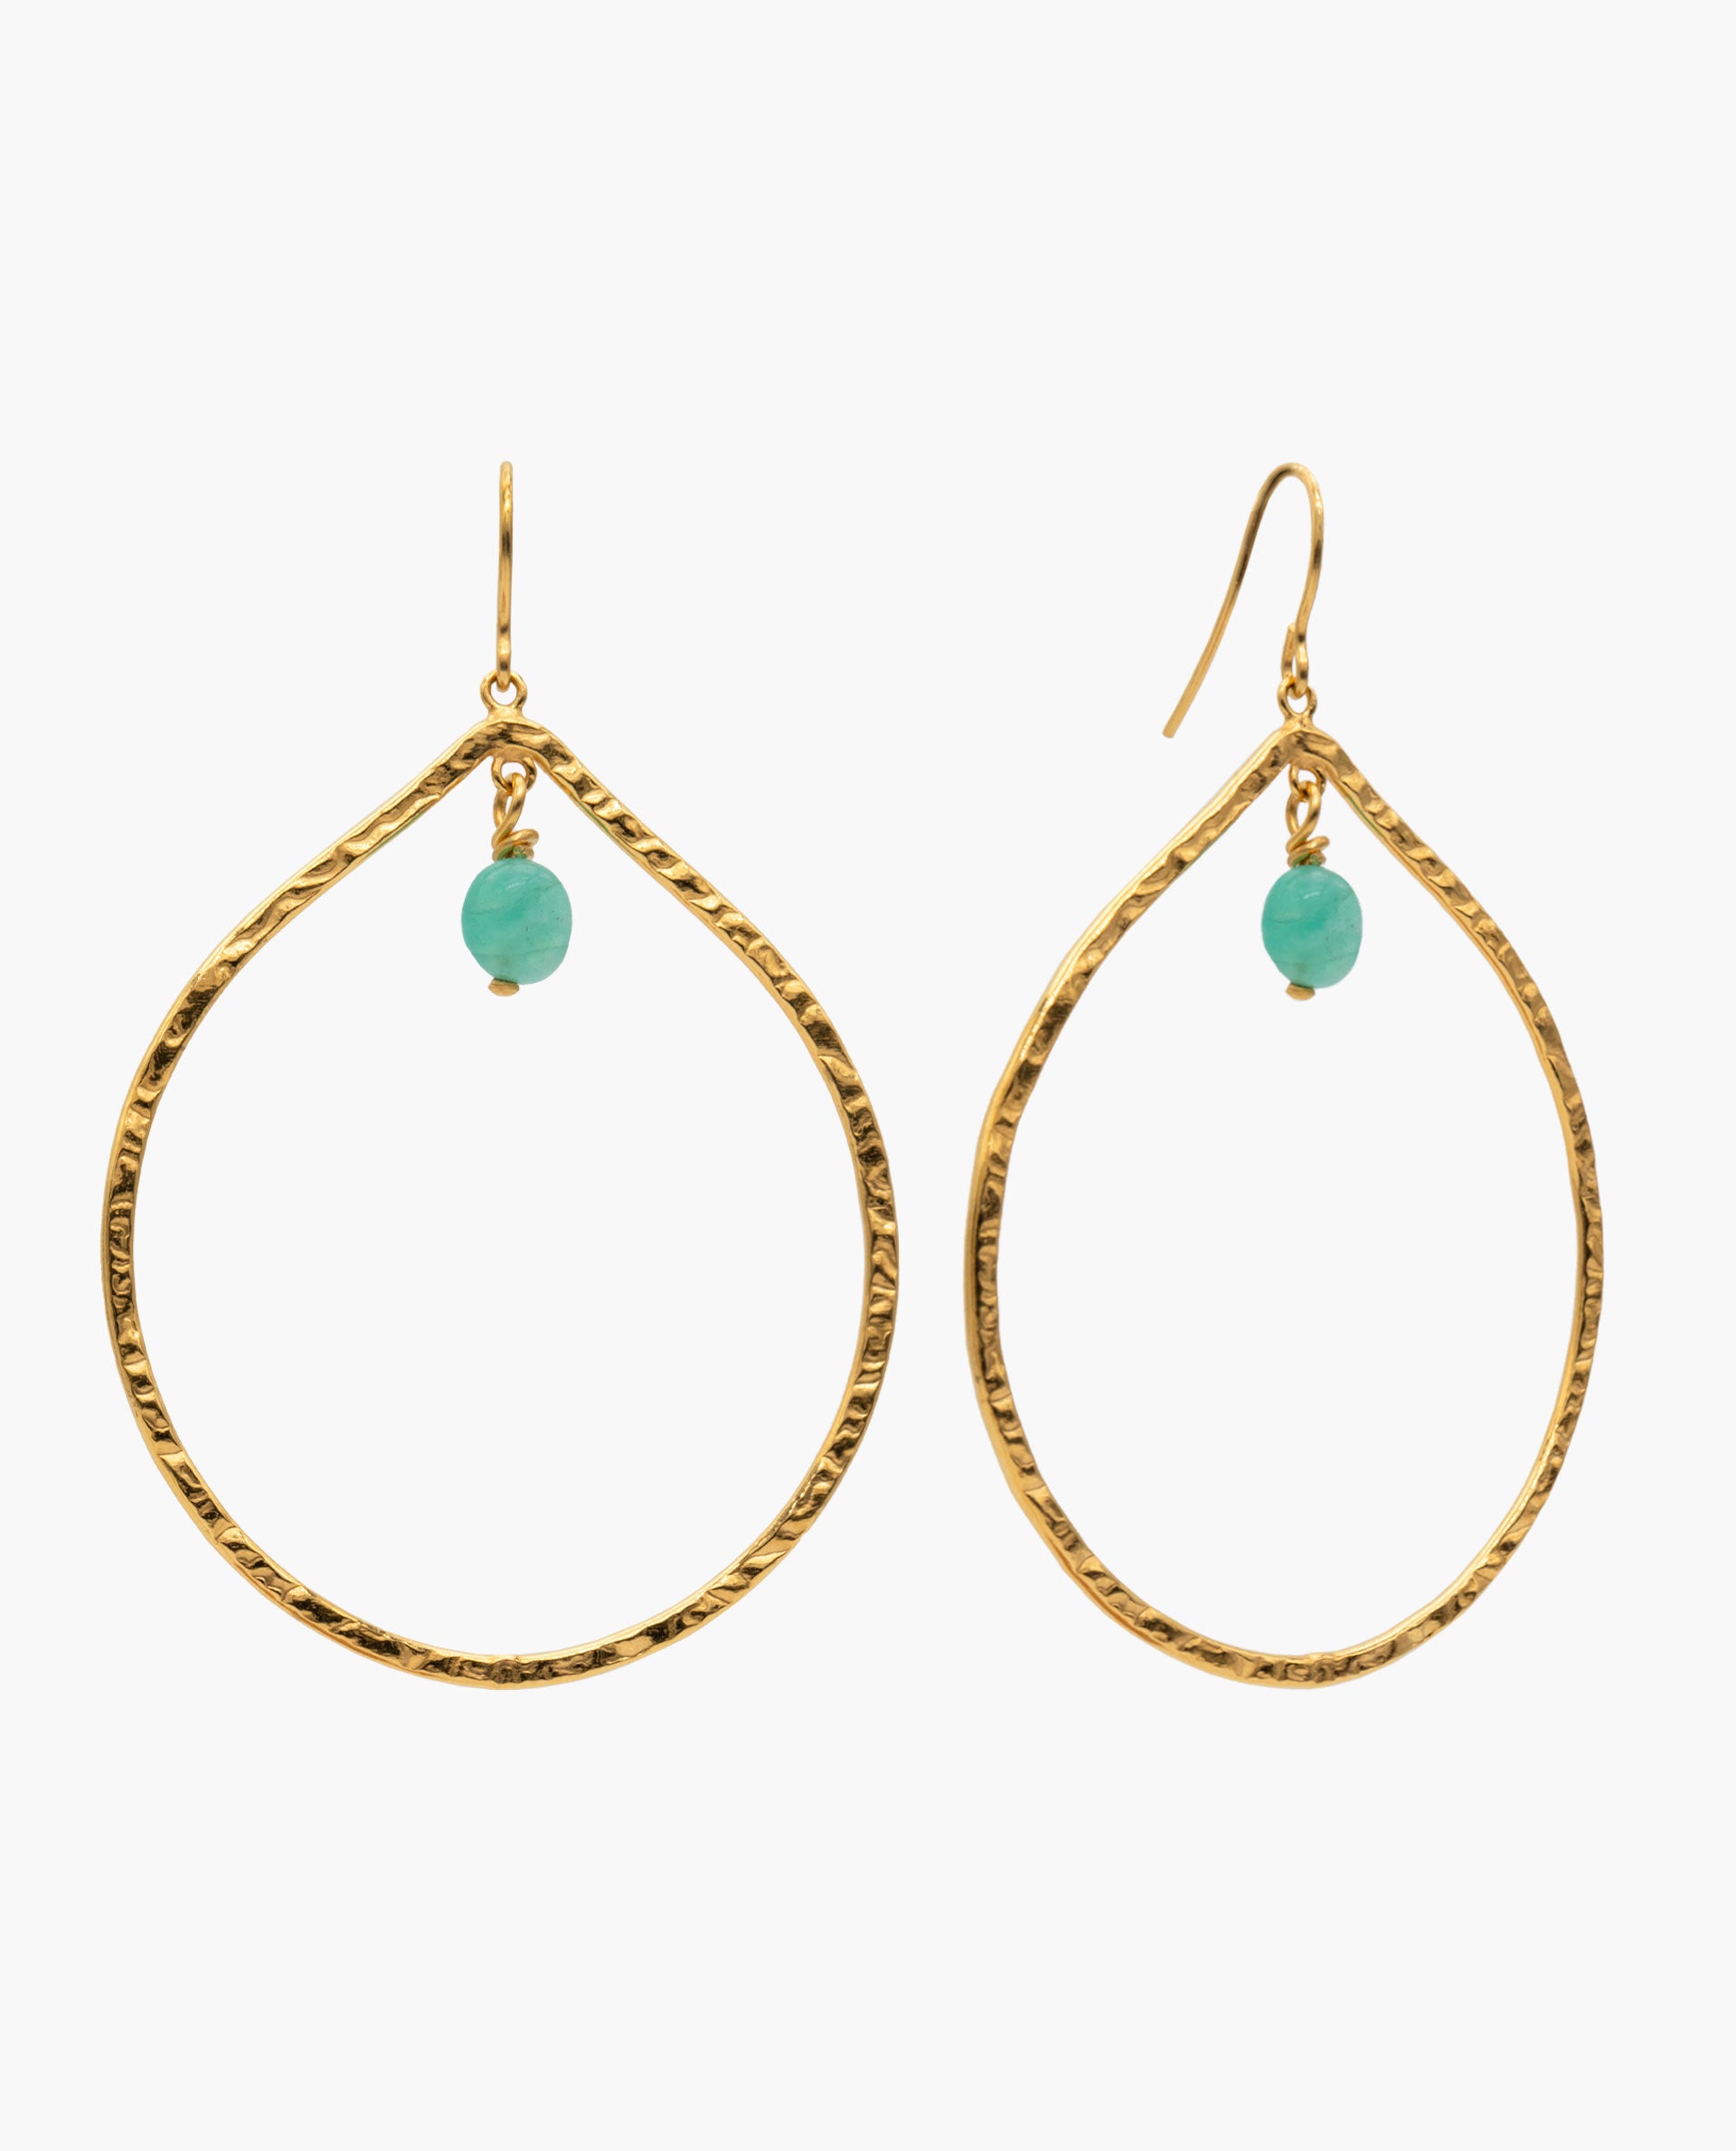 EARRINGS TEAR TURQUOISE - GOLD PLATED